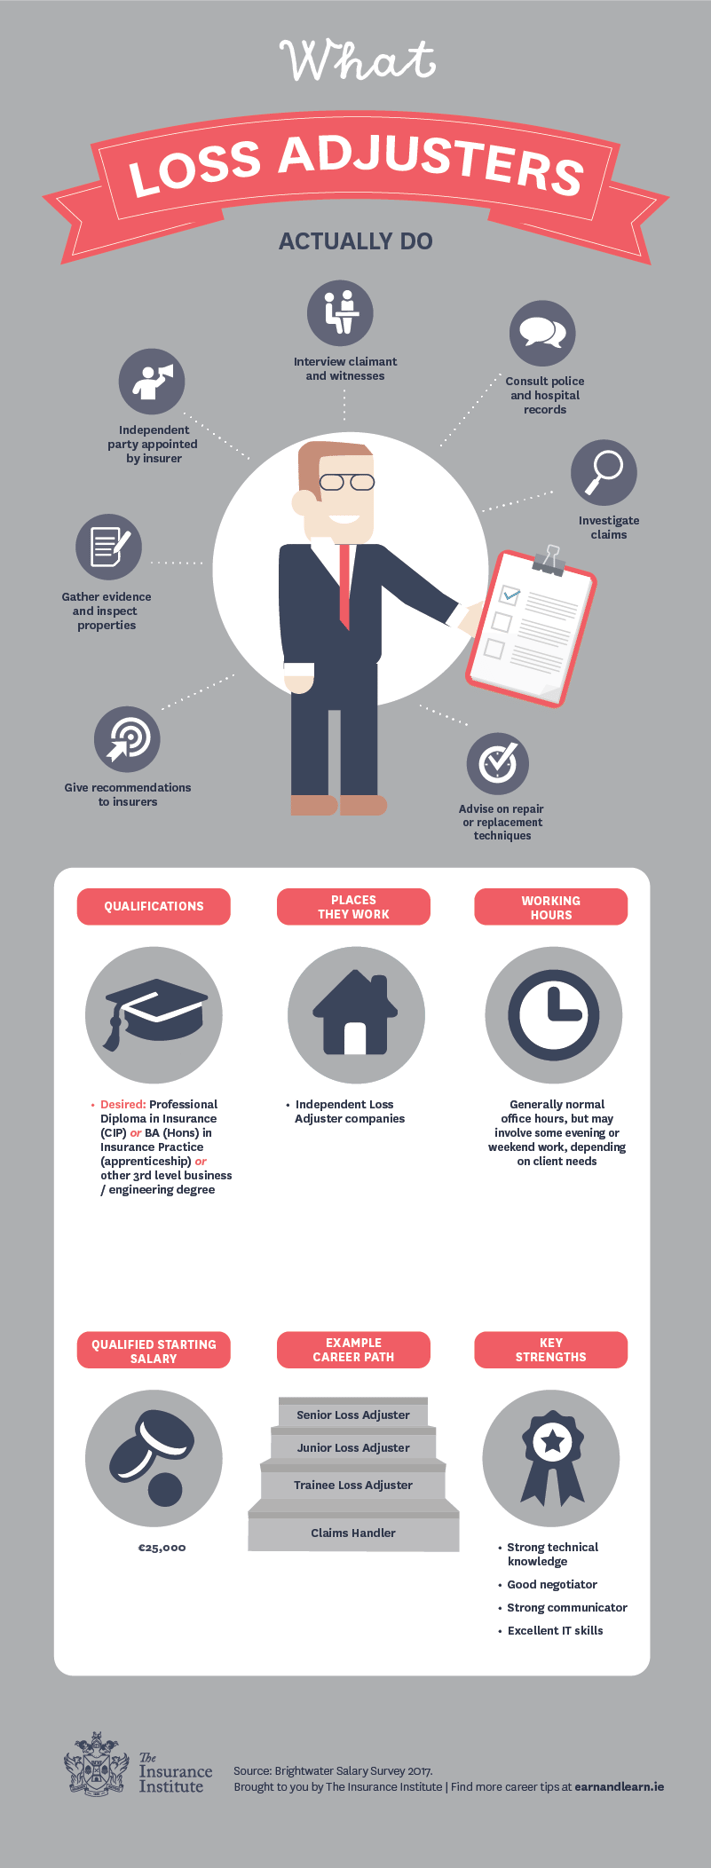 What Does A Loss Adjuster Actually Do Infographic